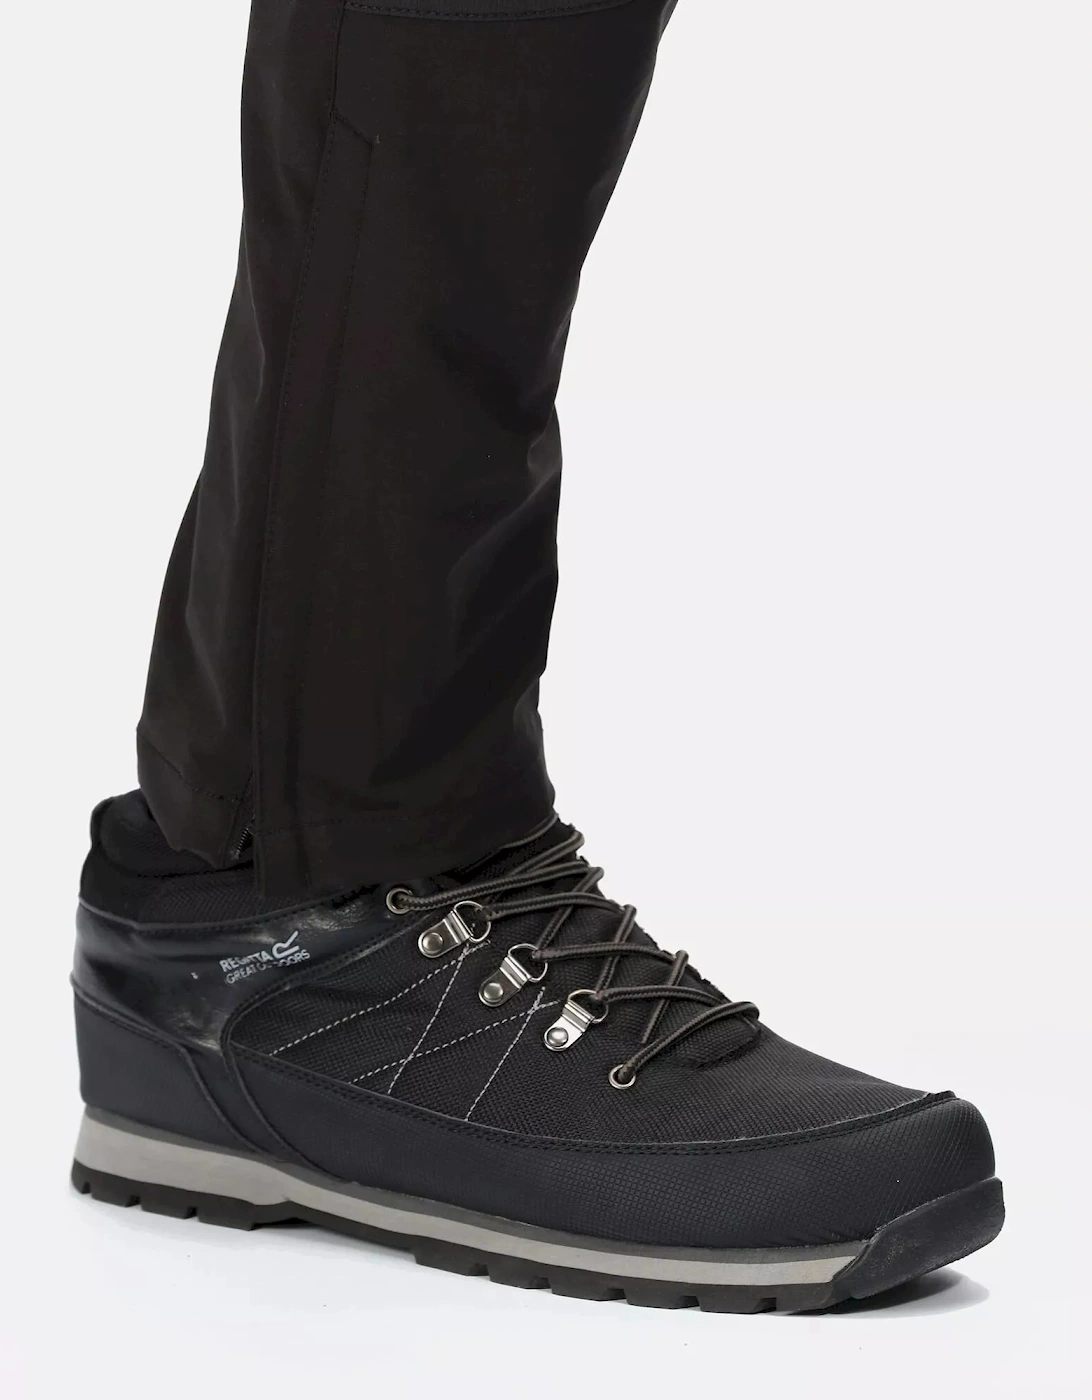 Mens Questra IV Hiking Trousers